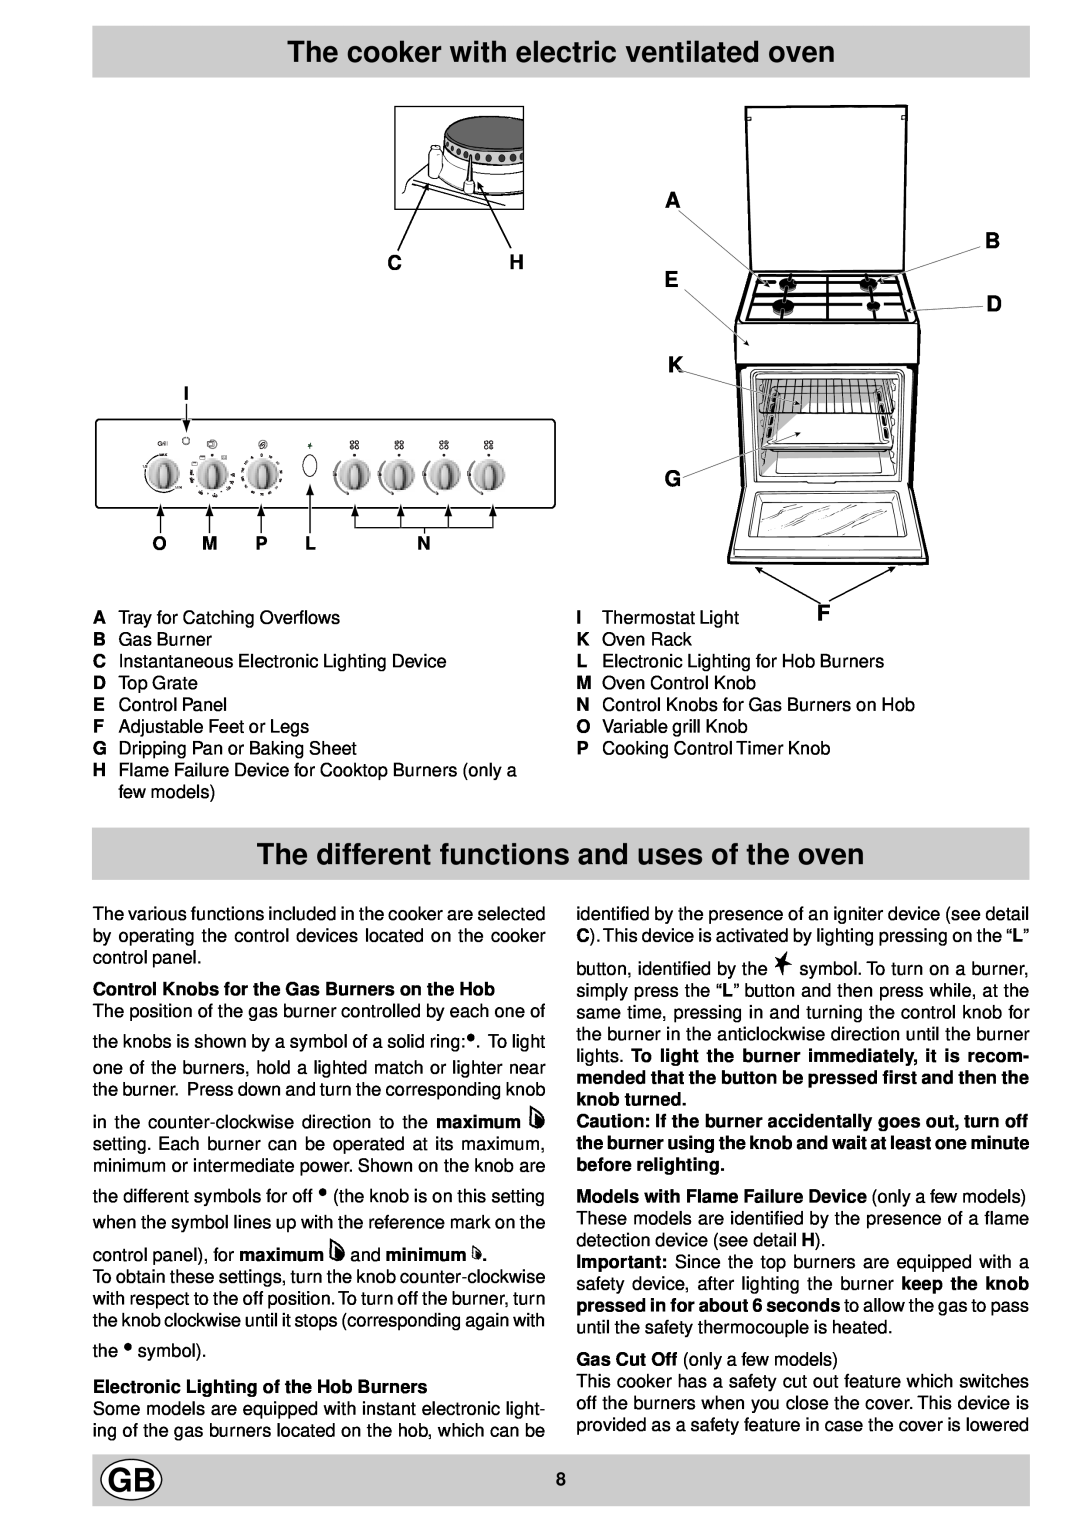 Indesit K 642 VS/G manual The cooker with electric ventilated oven, The different functions and uses of the oven, E D K 